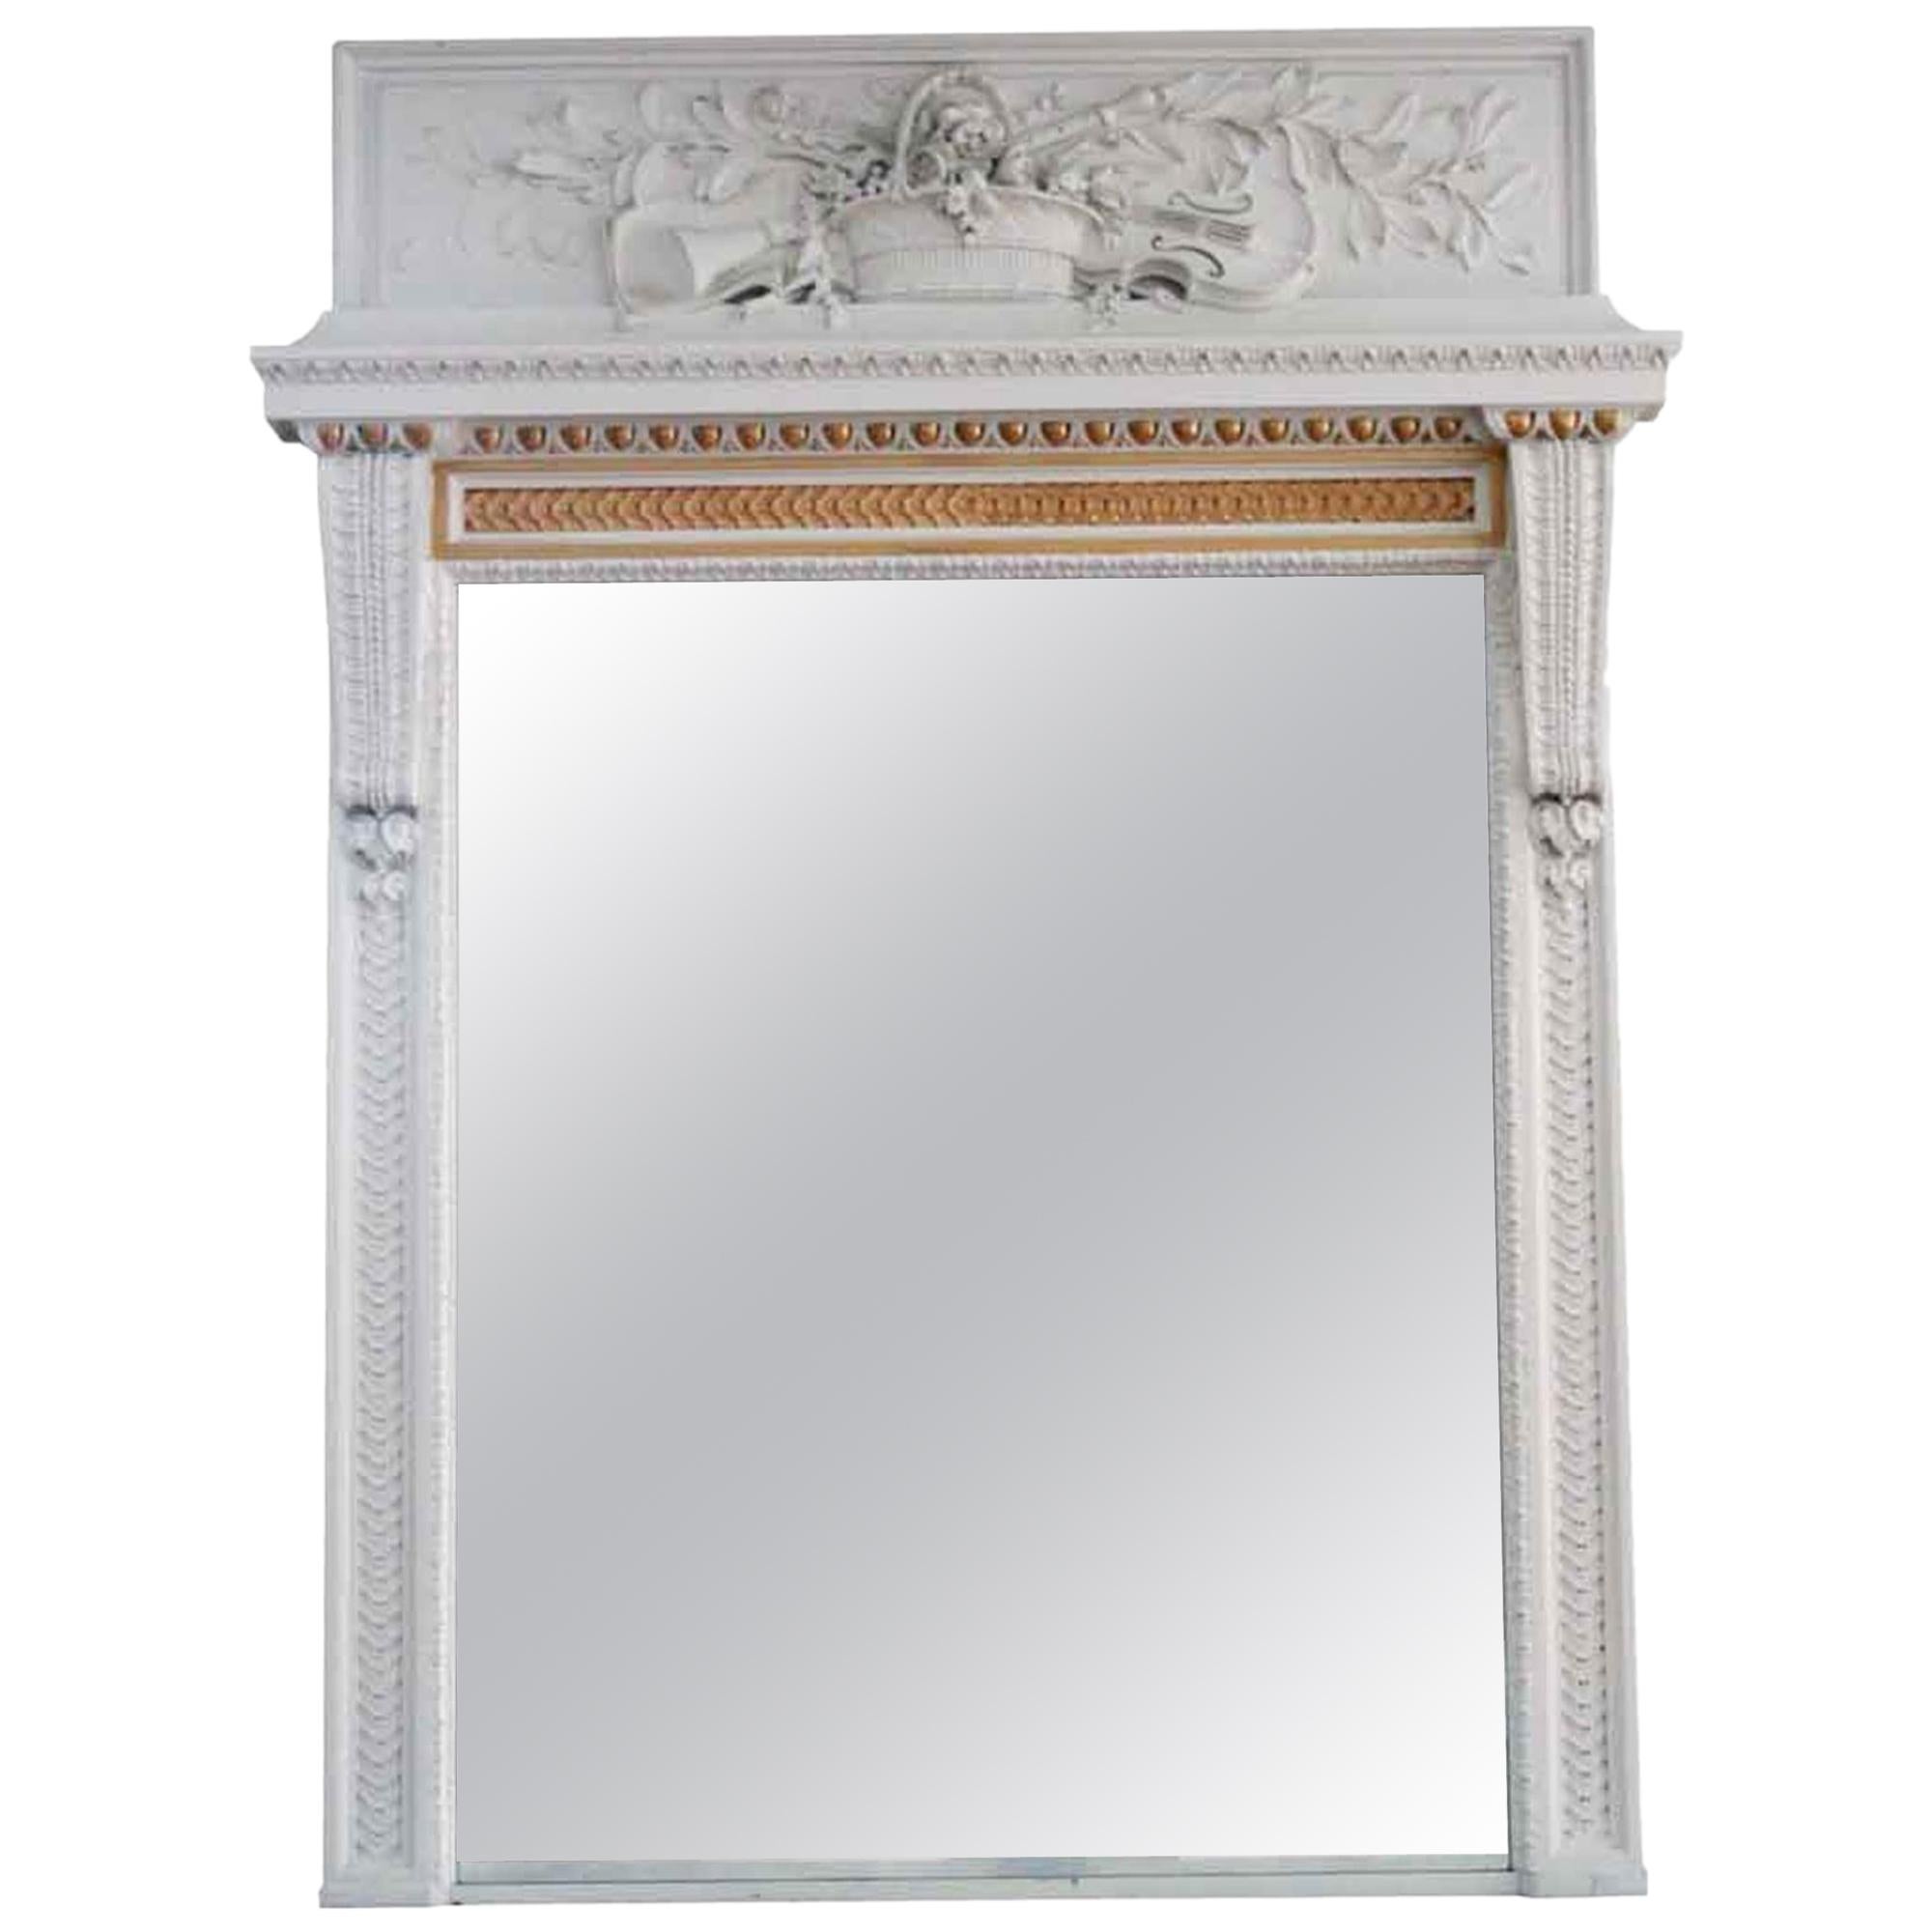 1931 NYC Waldorf Astoria Hotel Carved White Wooden Overmantel Mirror